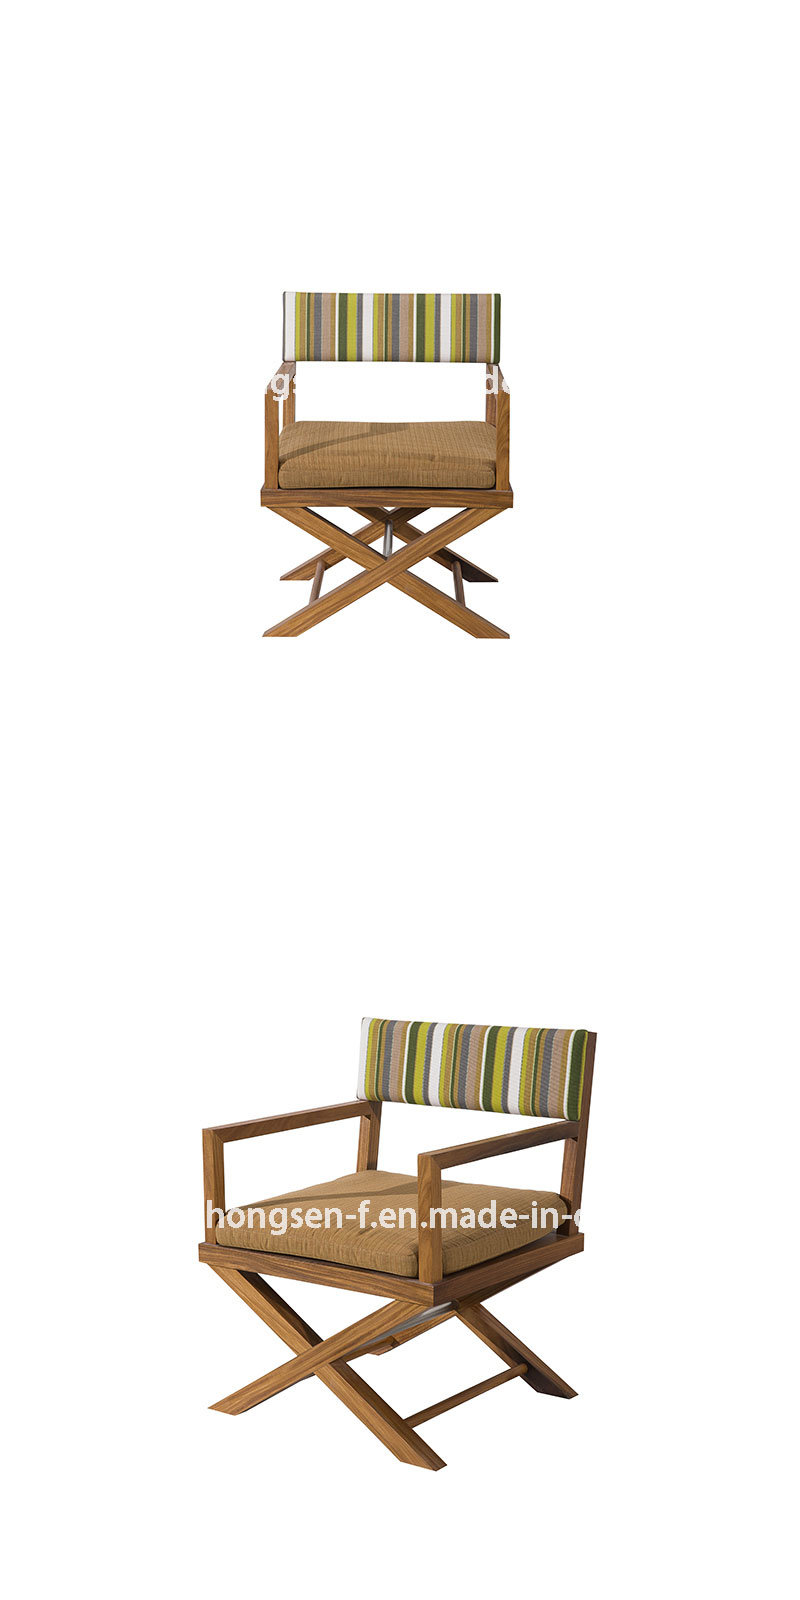 Hotel Solid Wood Furniture Manufacturers/Maker Custom Made Outdoor Leiture Chair Make of Teak and Fabric-Zbc-888